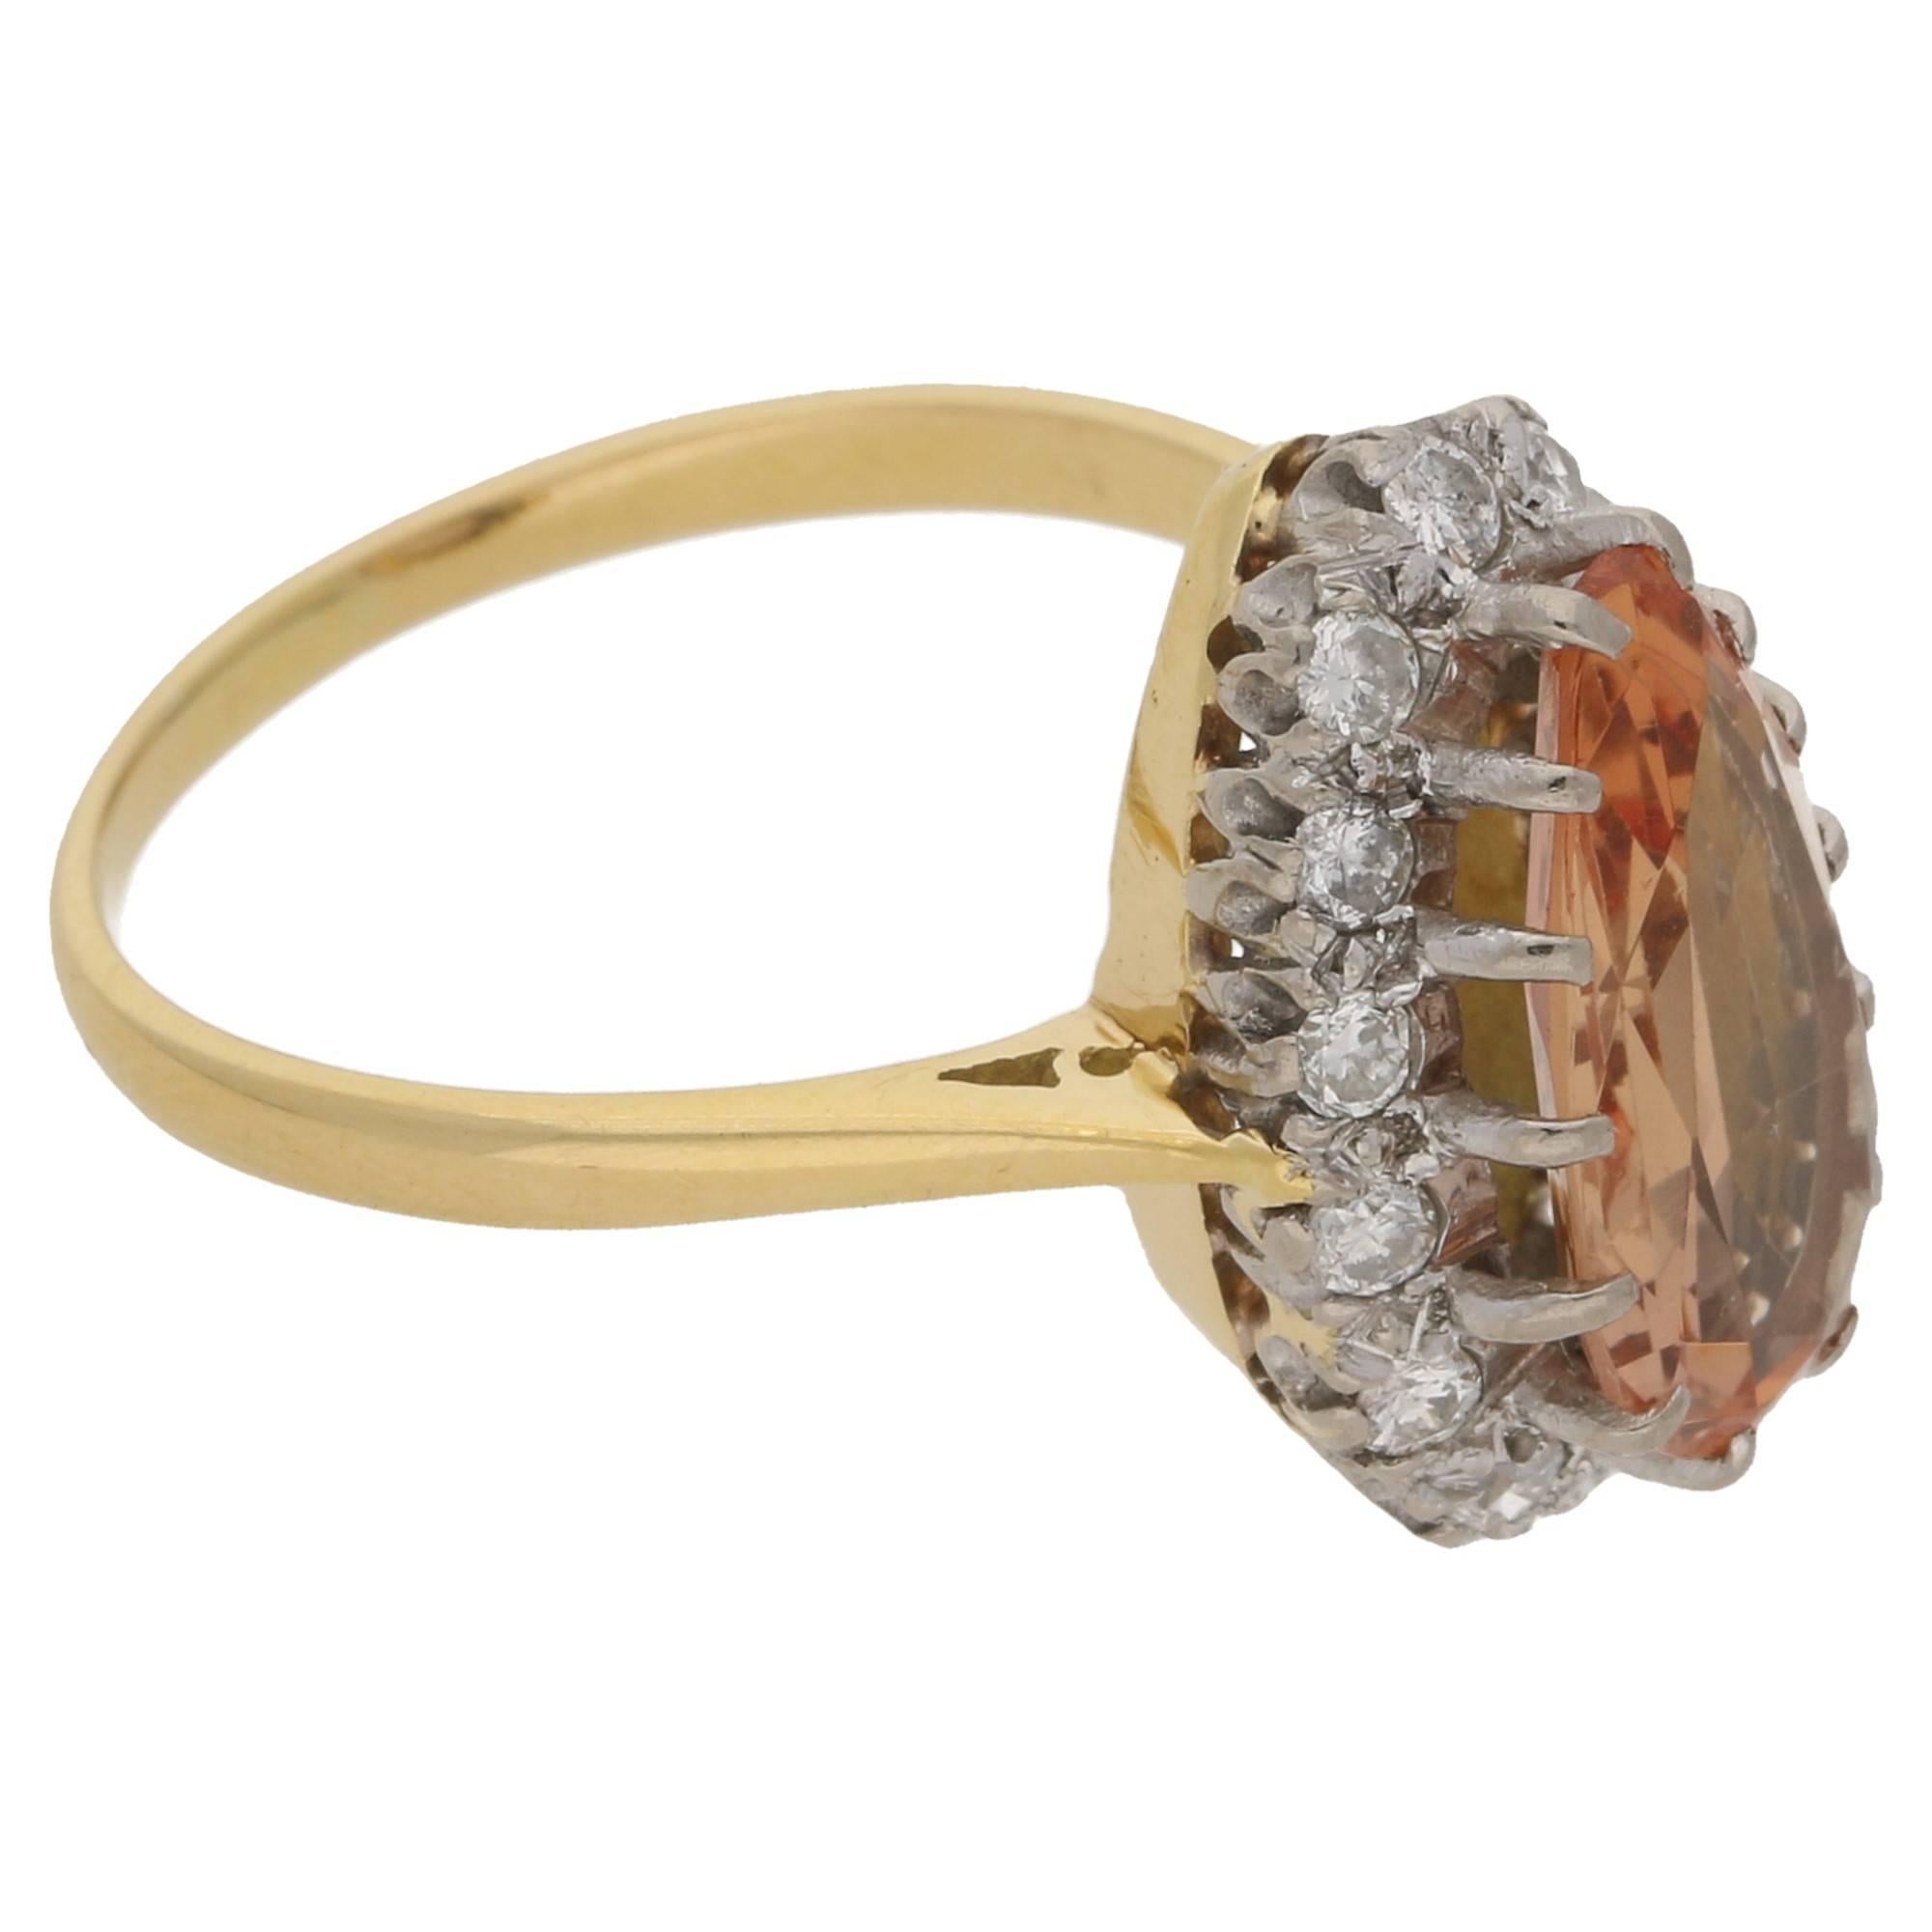 A pendeloque cut peach coloured topaz set in fourteen platinum claws, surrounded by a border of fourteen round brilliant cut diamonds, claw set in platinum. Leading to an 18ct yellow gold undercarriage with open cheniers. Estimated topaz weight